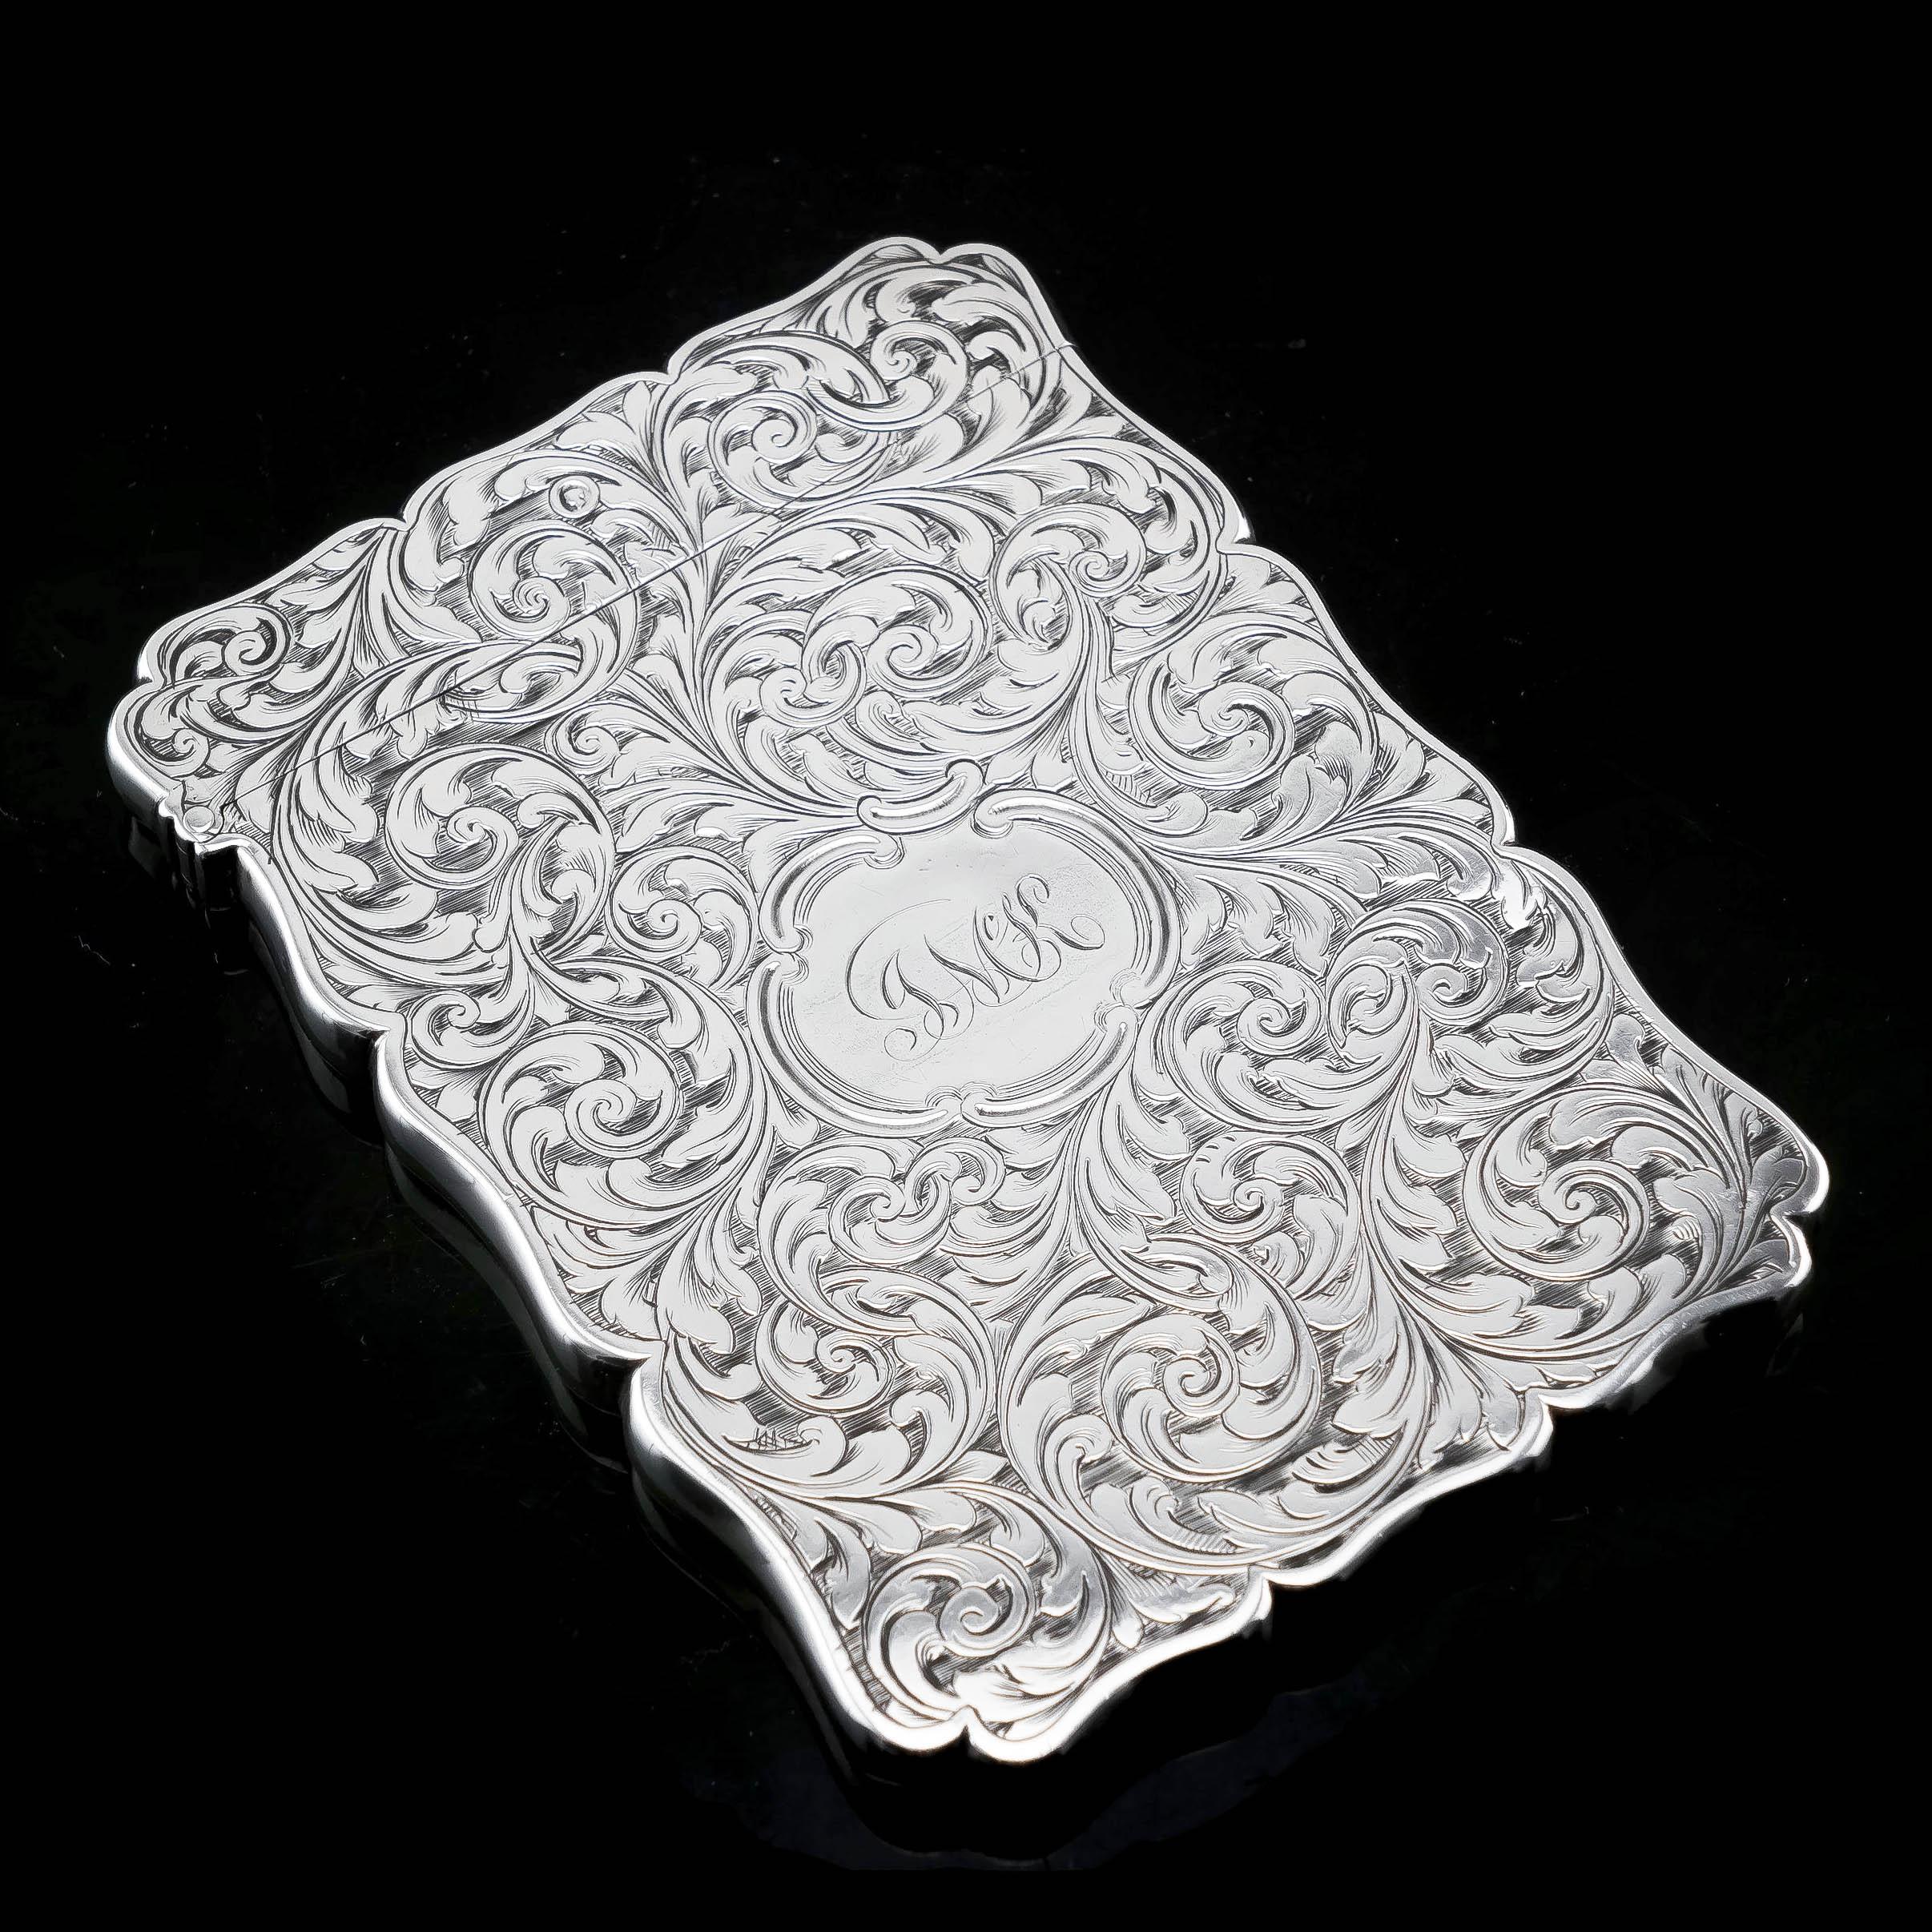 Antique Solid Silver Card Case Engraved Acanthus Motif, Edward Smith, 1862 For Sale 12